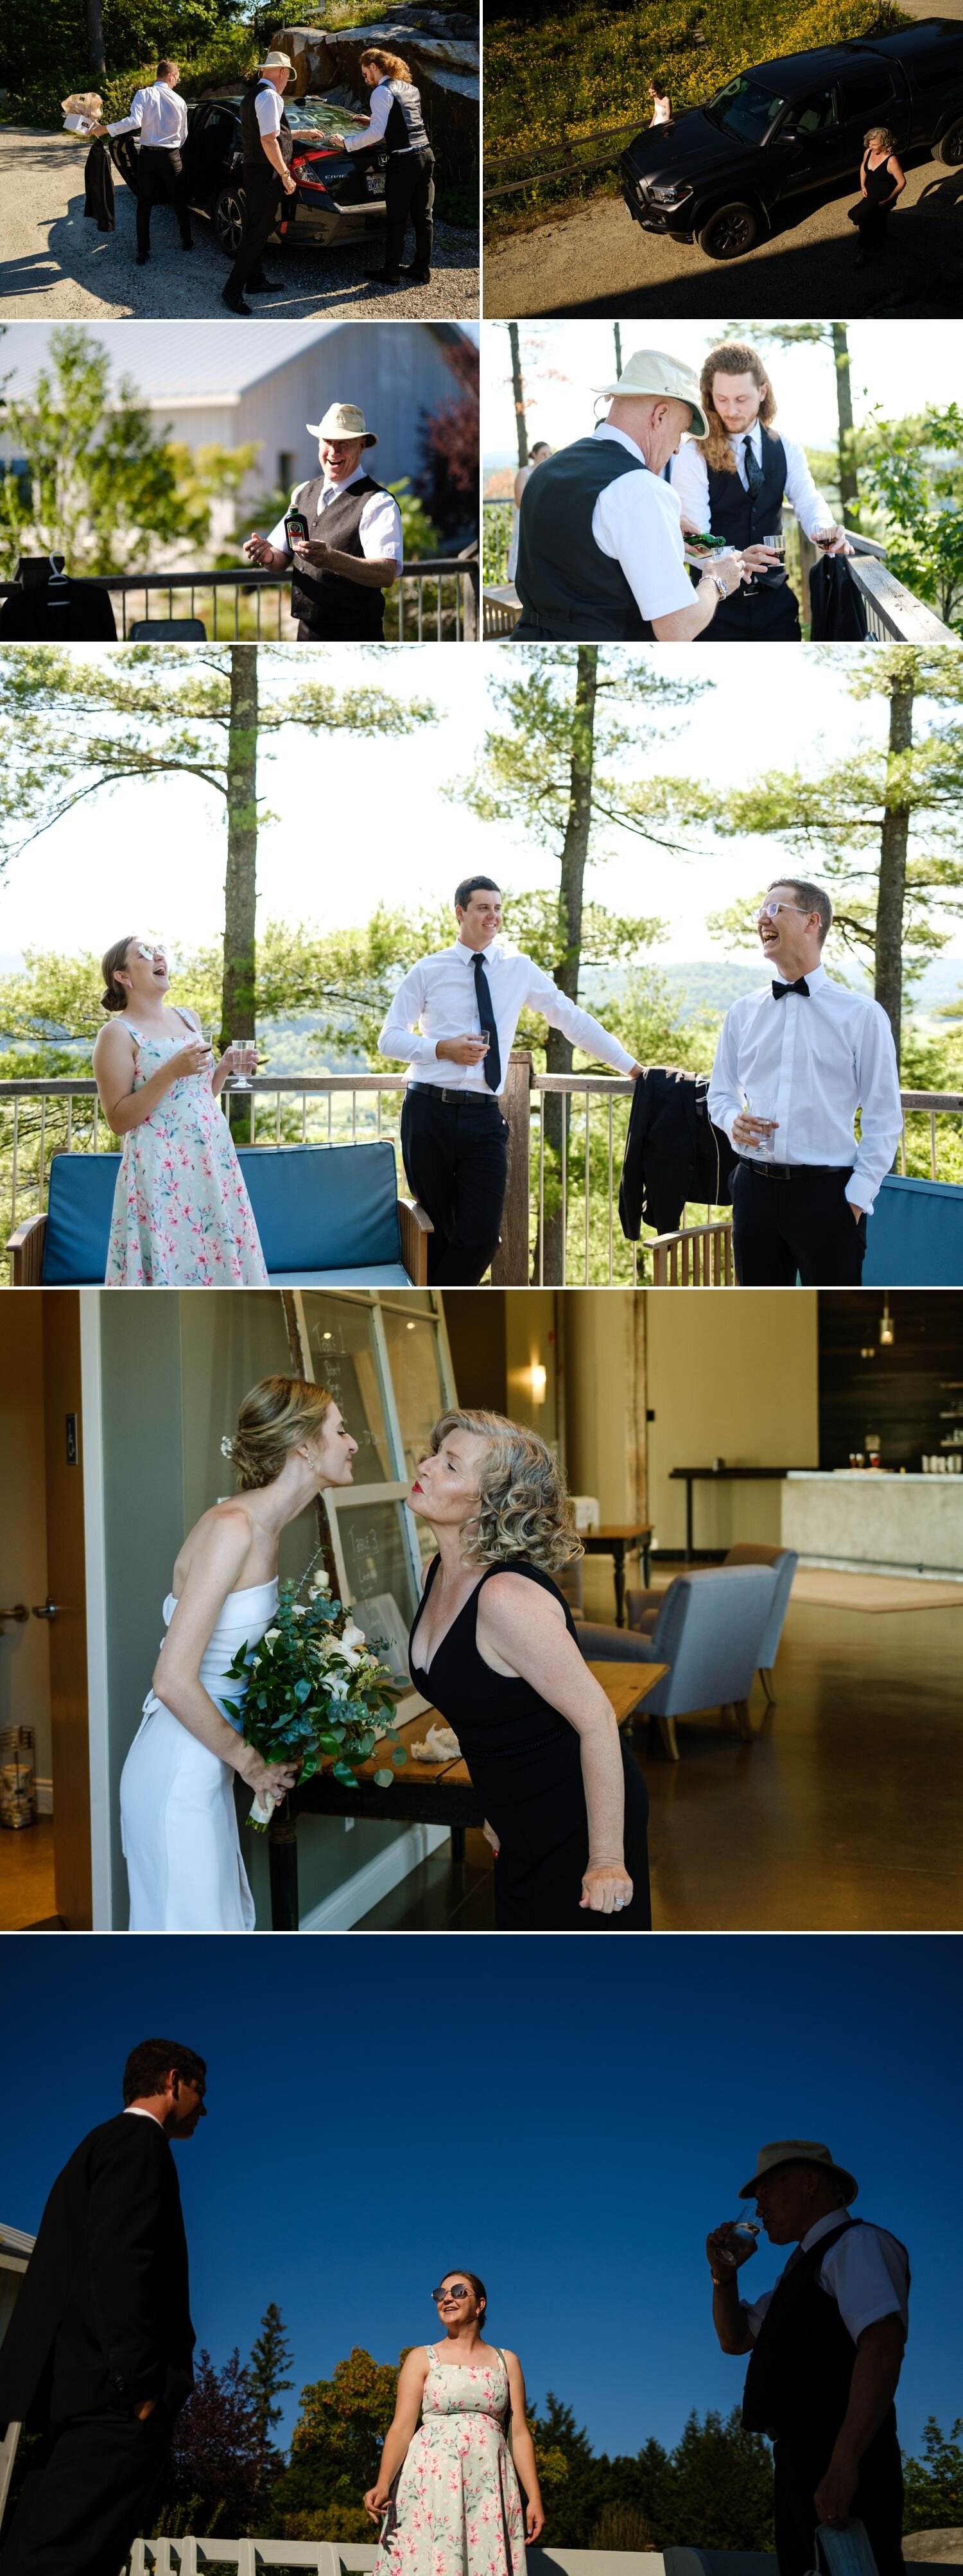 candid moments of wedding party before a wedding ceremony at le belvedere in wakefield quebec